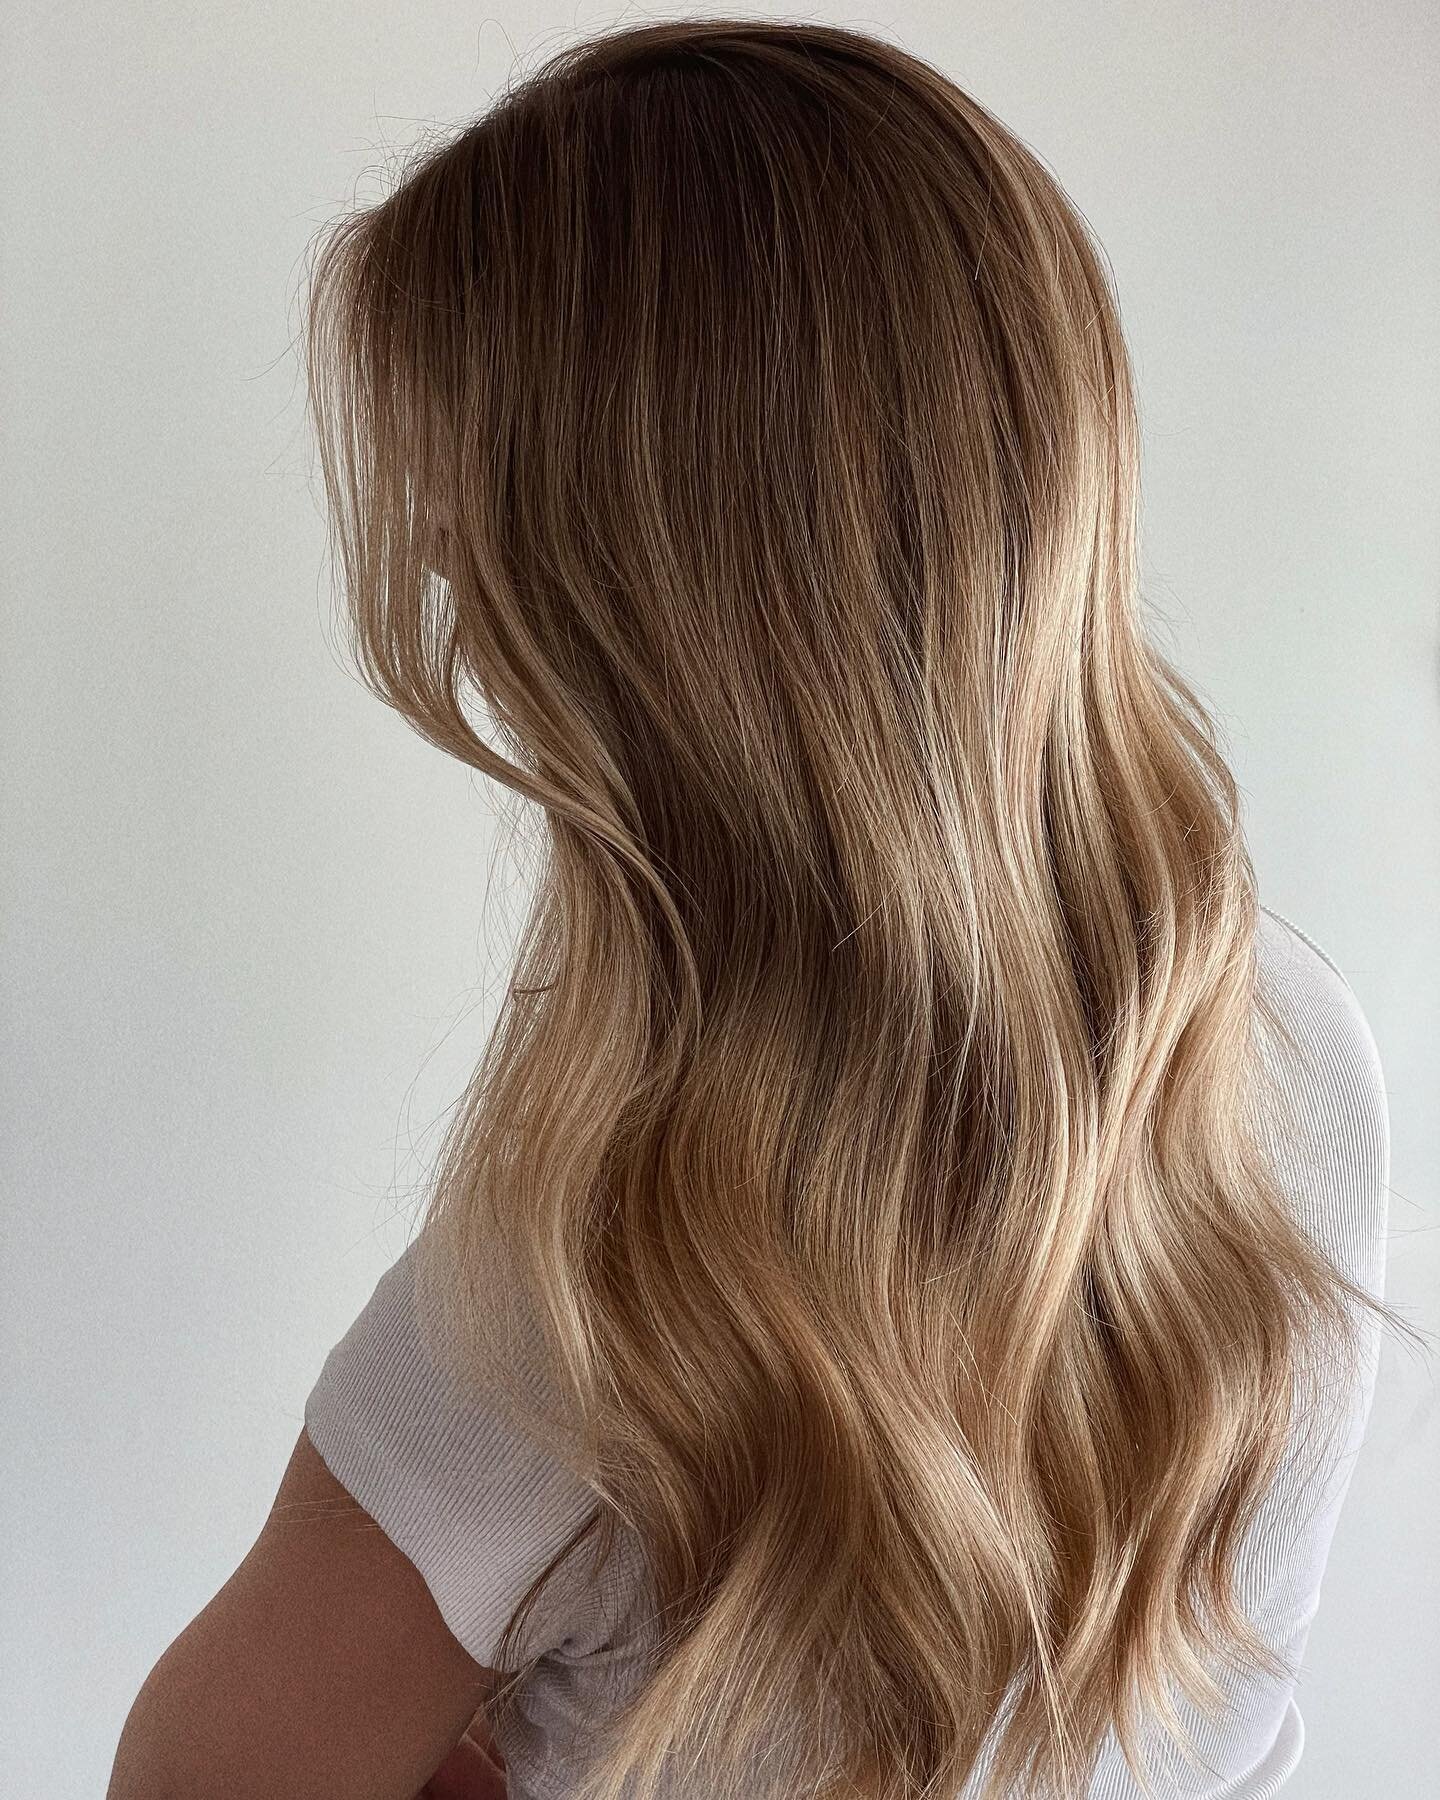 Soft and blended 💖

We did a colour melt to achieve this natural blonde. This look will grow out very nicely and she won&rsquo;t have to get her blonde touched up for several months. 

I have a couple of appointments left before summer starts, you c